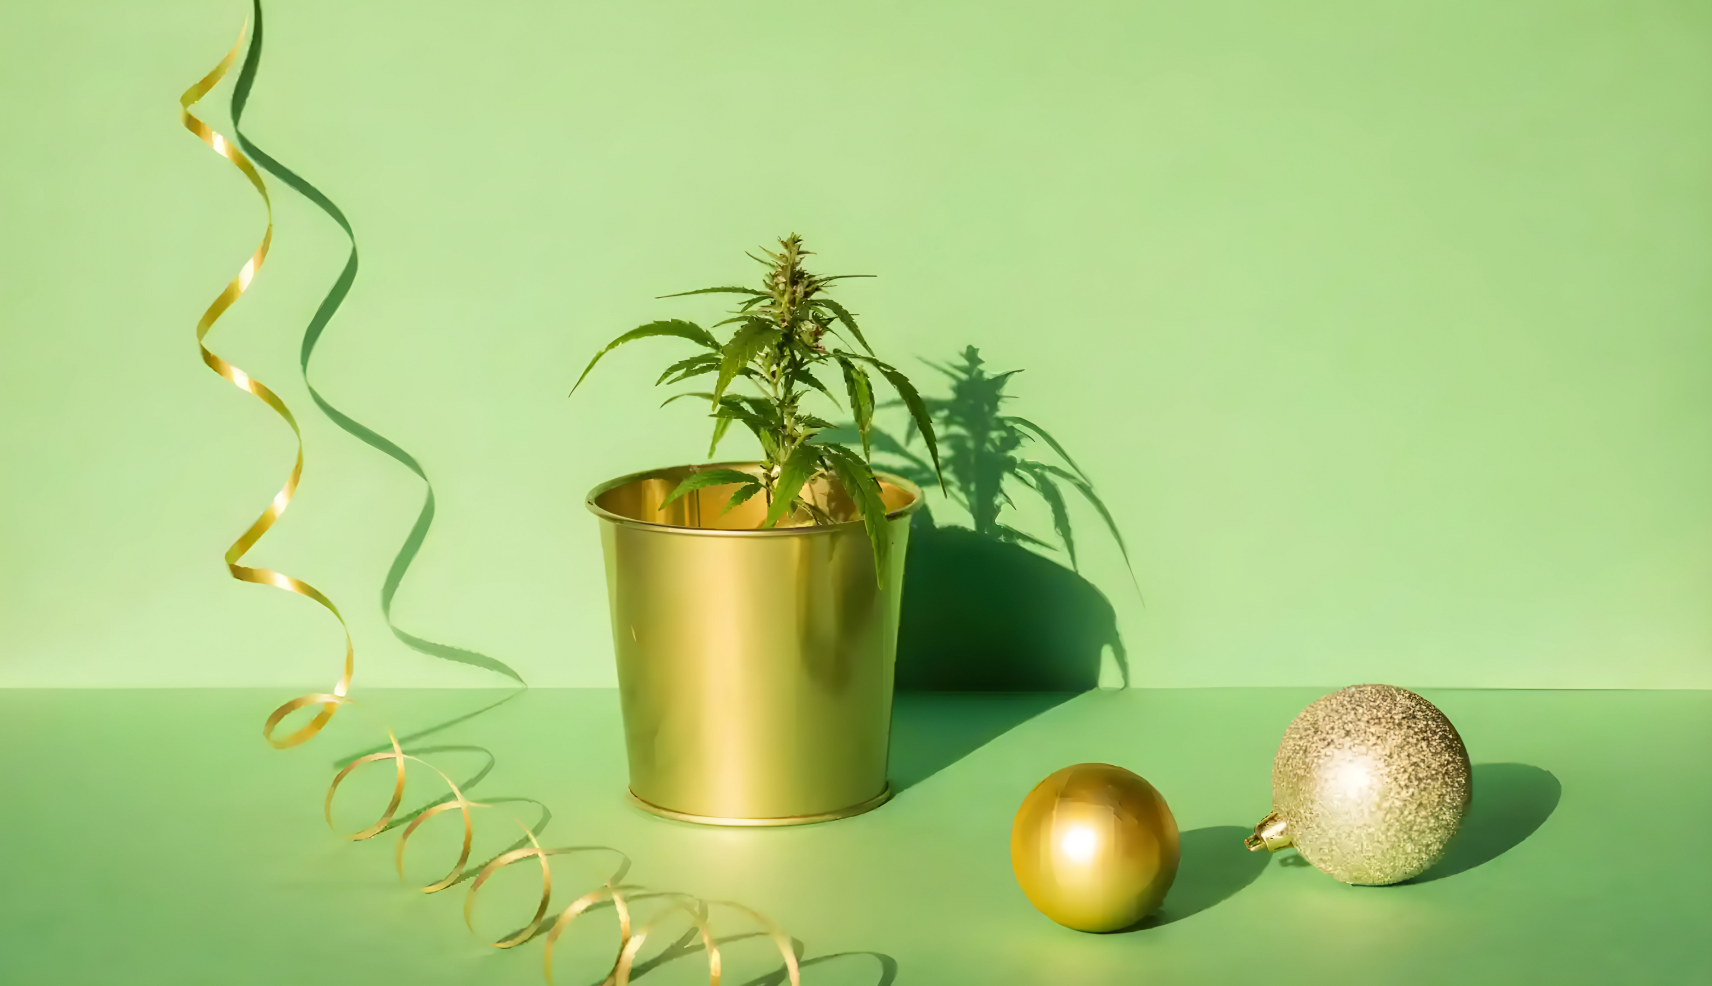 A modern still life image featuring a potted cannabis plant in a shiny gold container, positioned on a plain surface with a pastel green background. To the right of the pot, there's a gold and a glittery Christmas ornament. A curly gold ribbon lies in the foreground, creating a festive atmosphere.